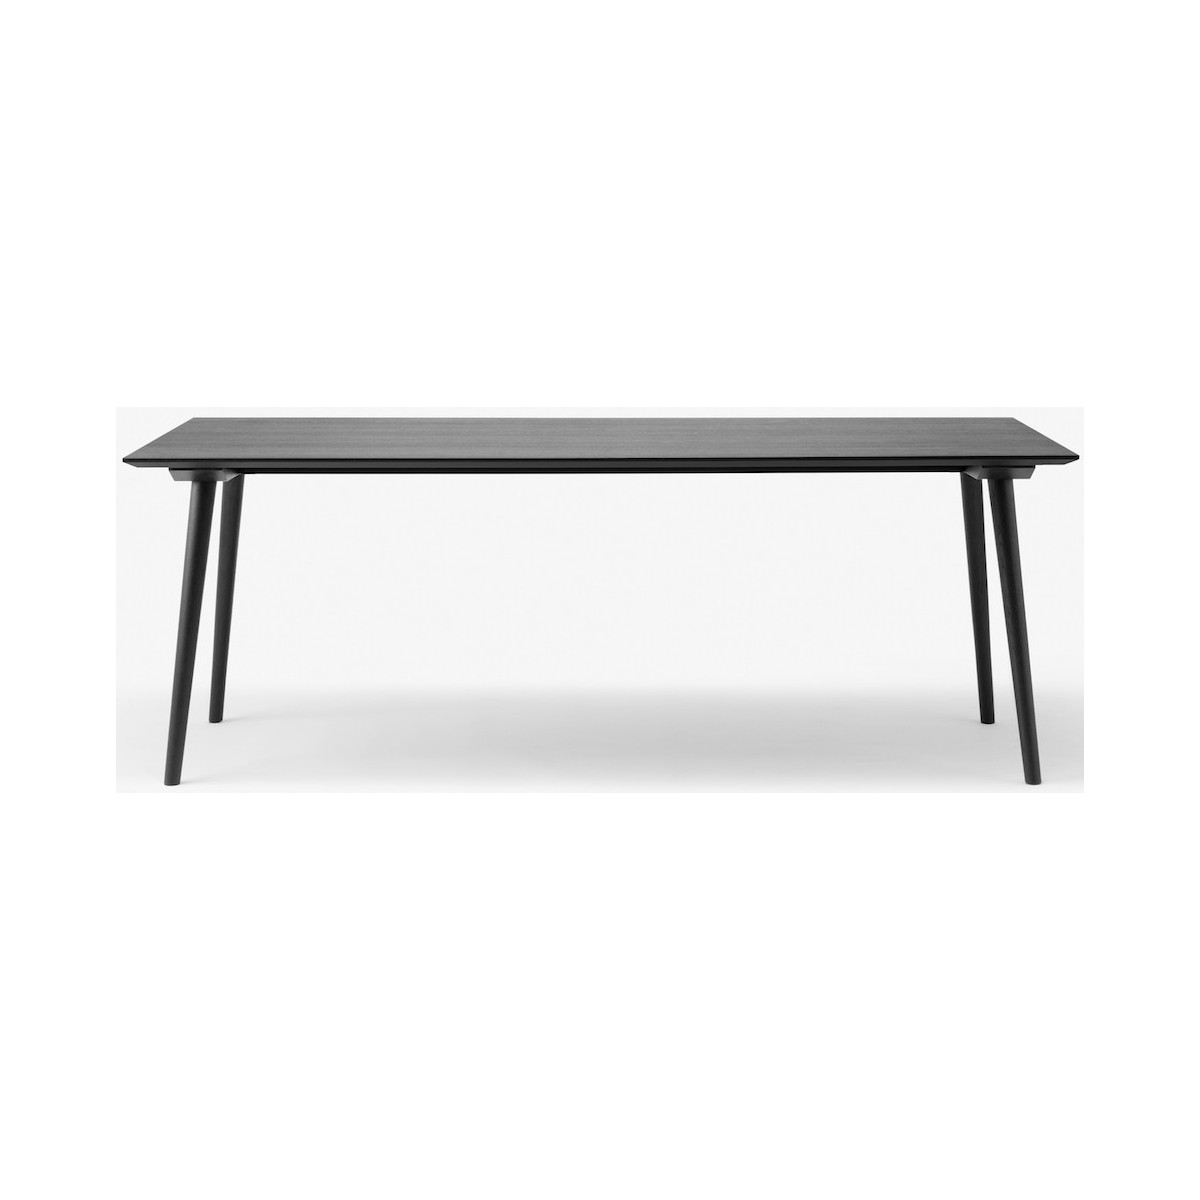 90x200cm - black lacquered oak - In Between SK5 table